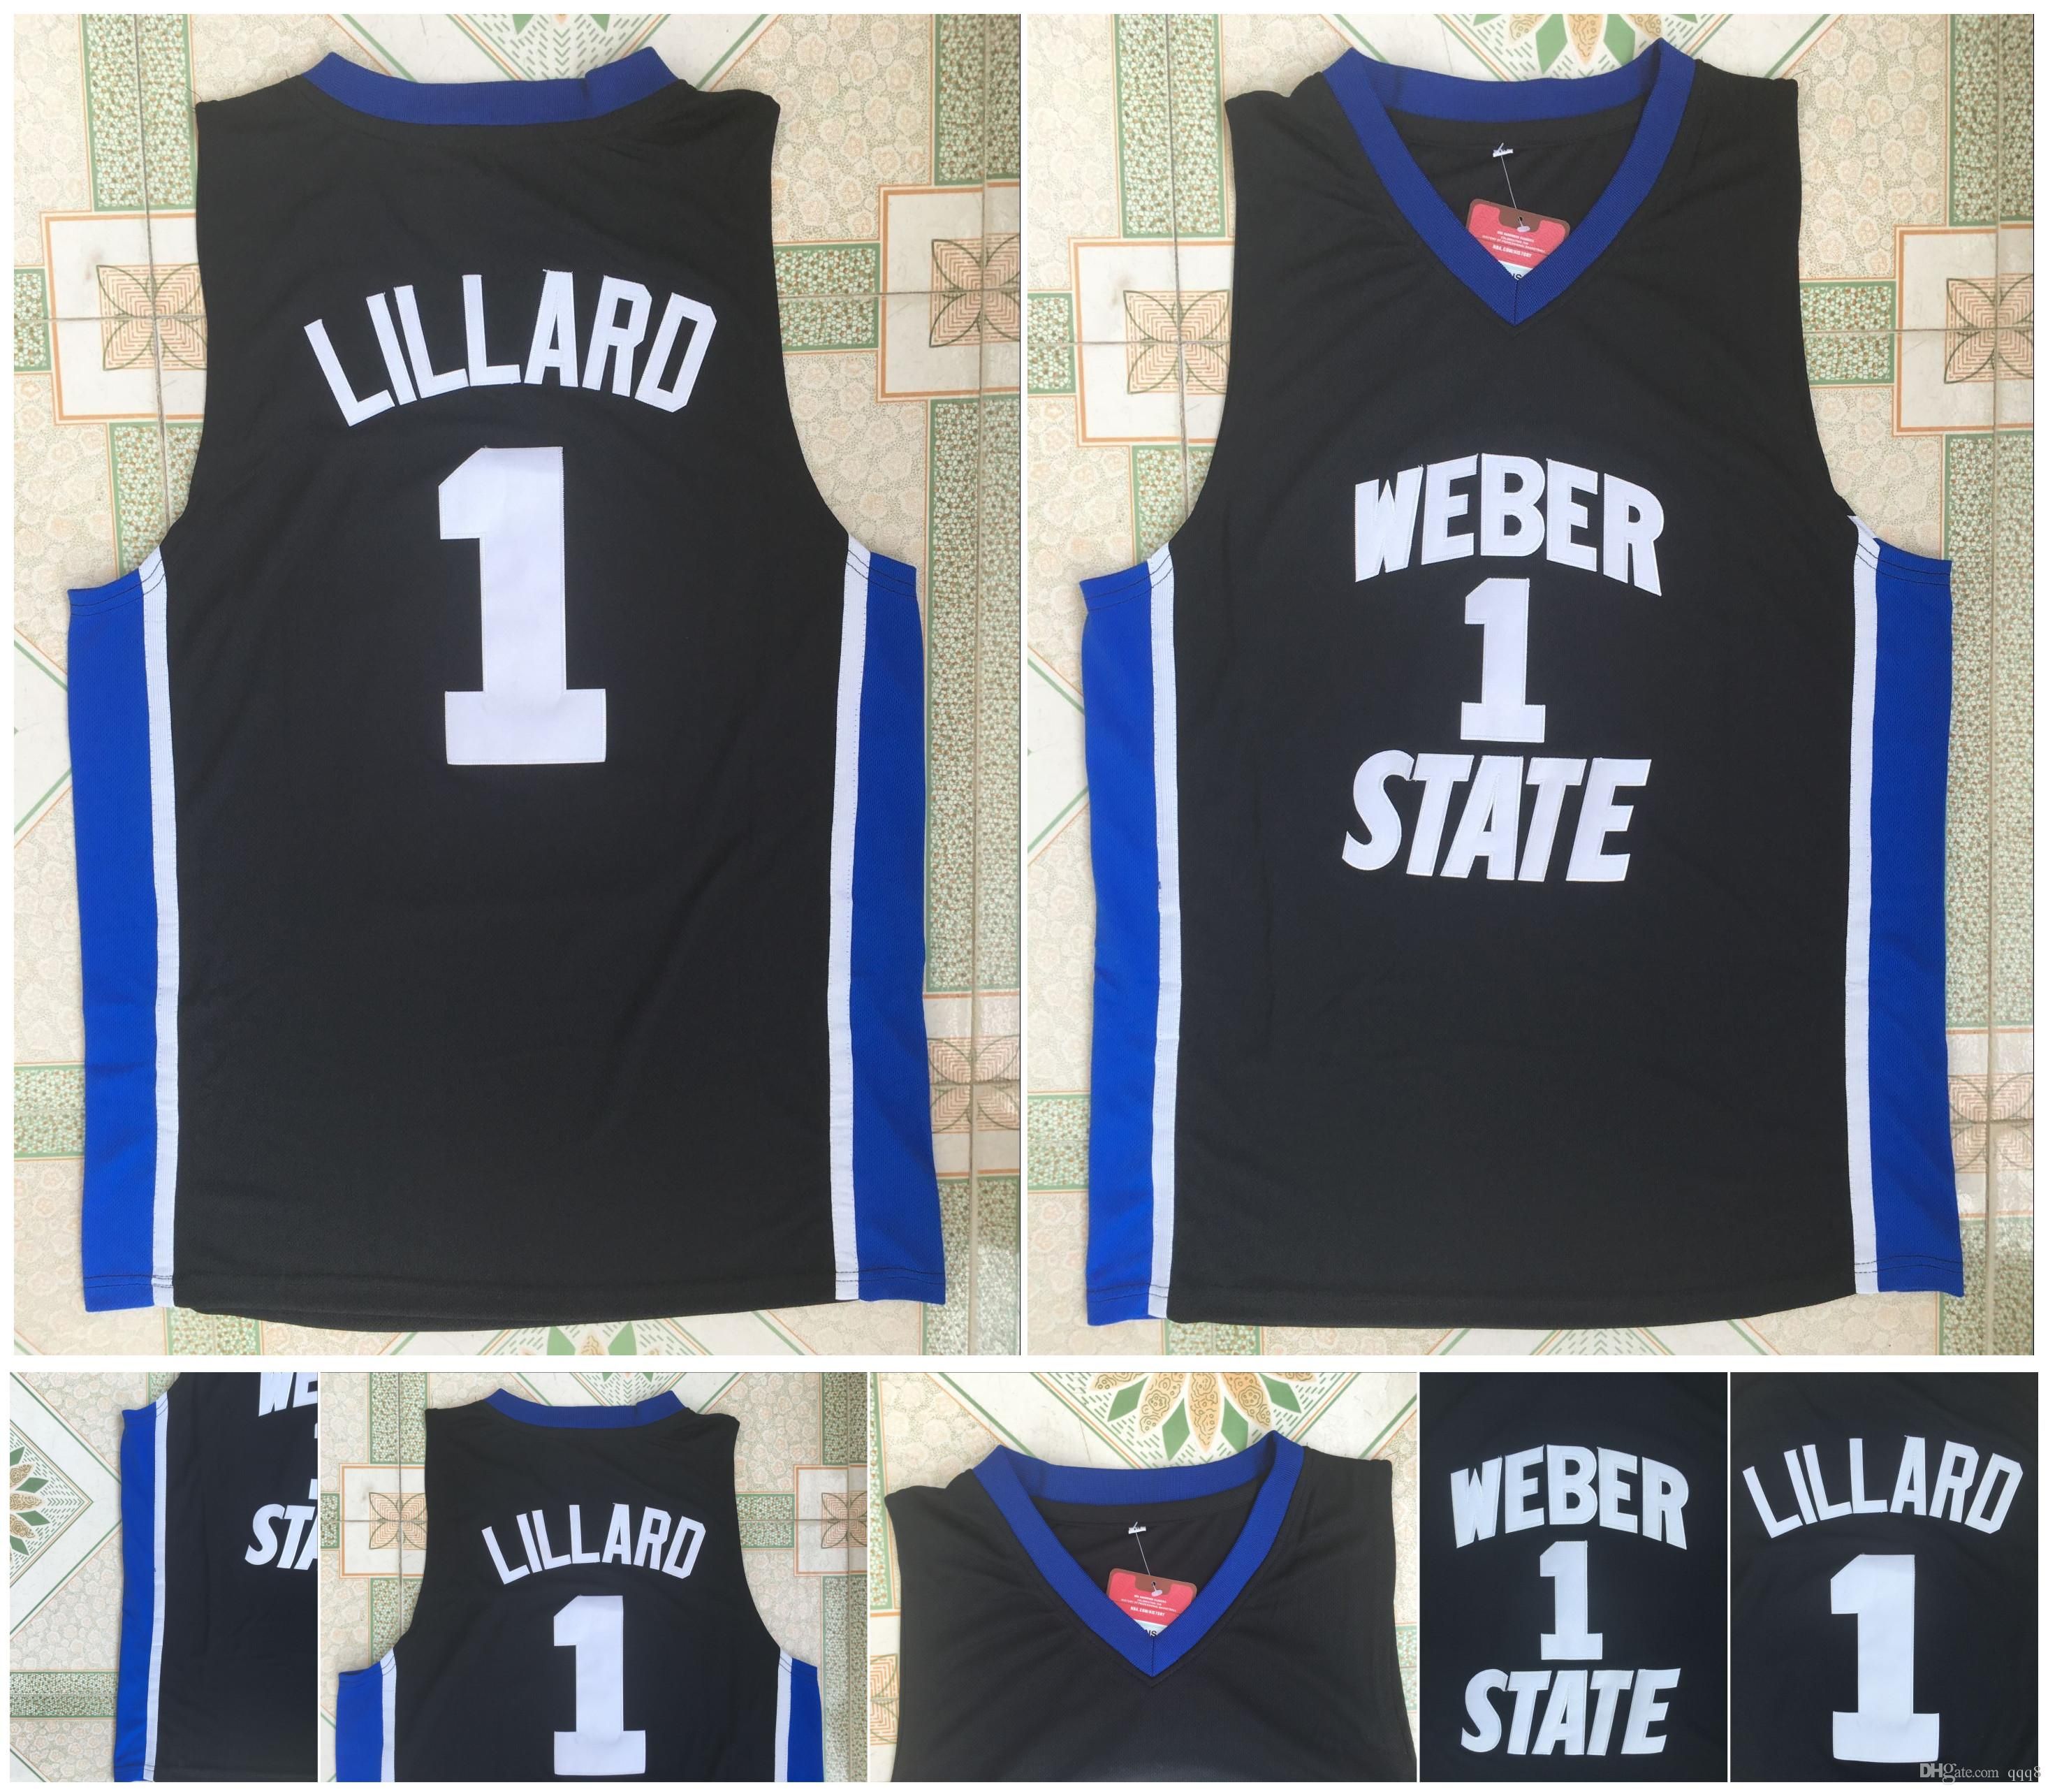 weber state jersey